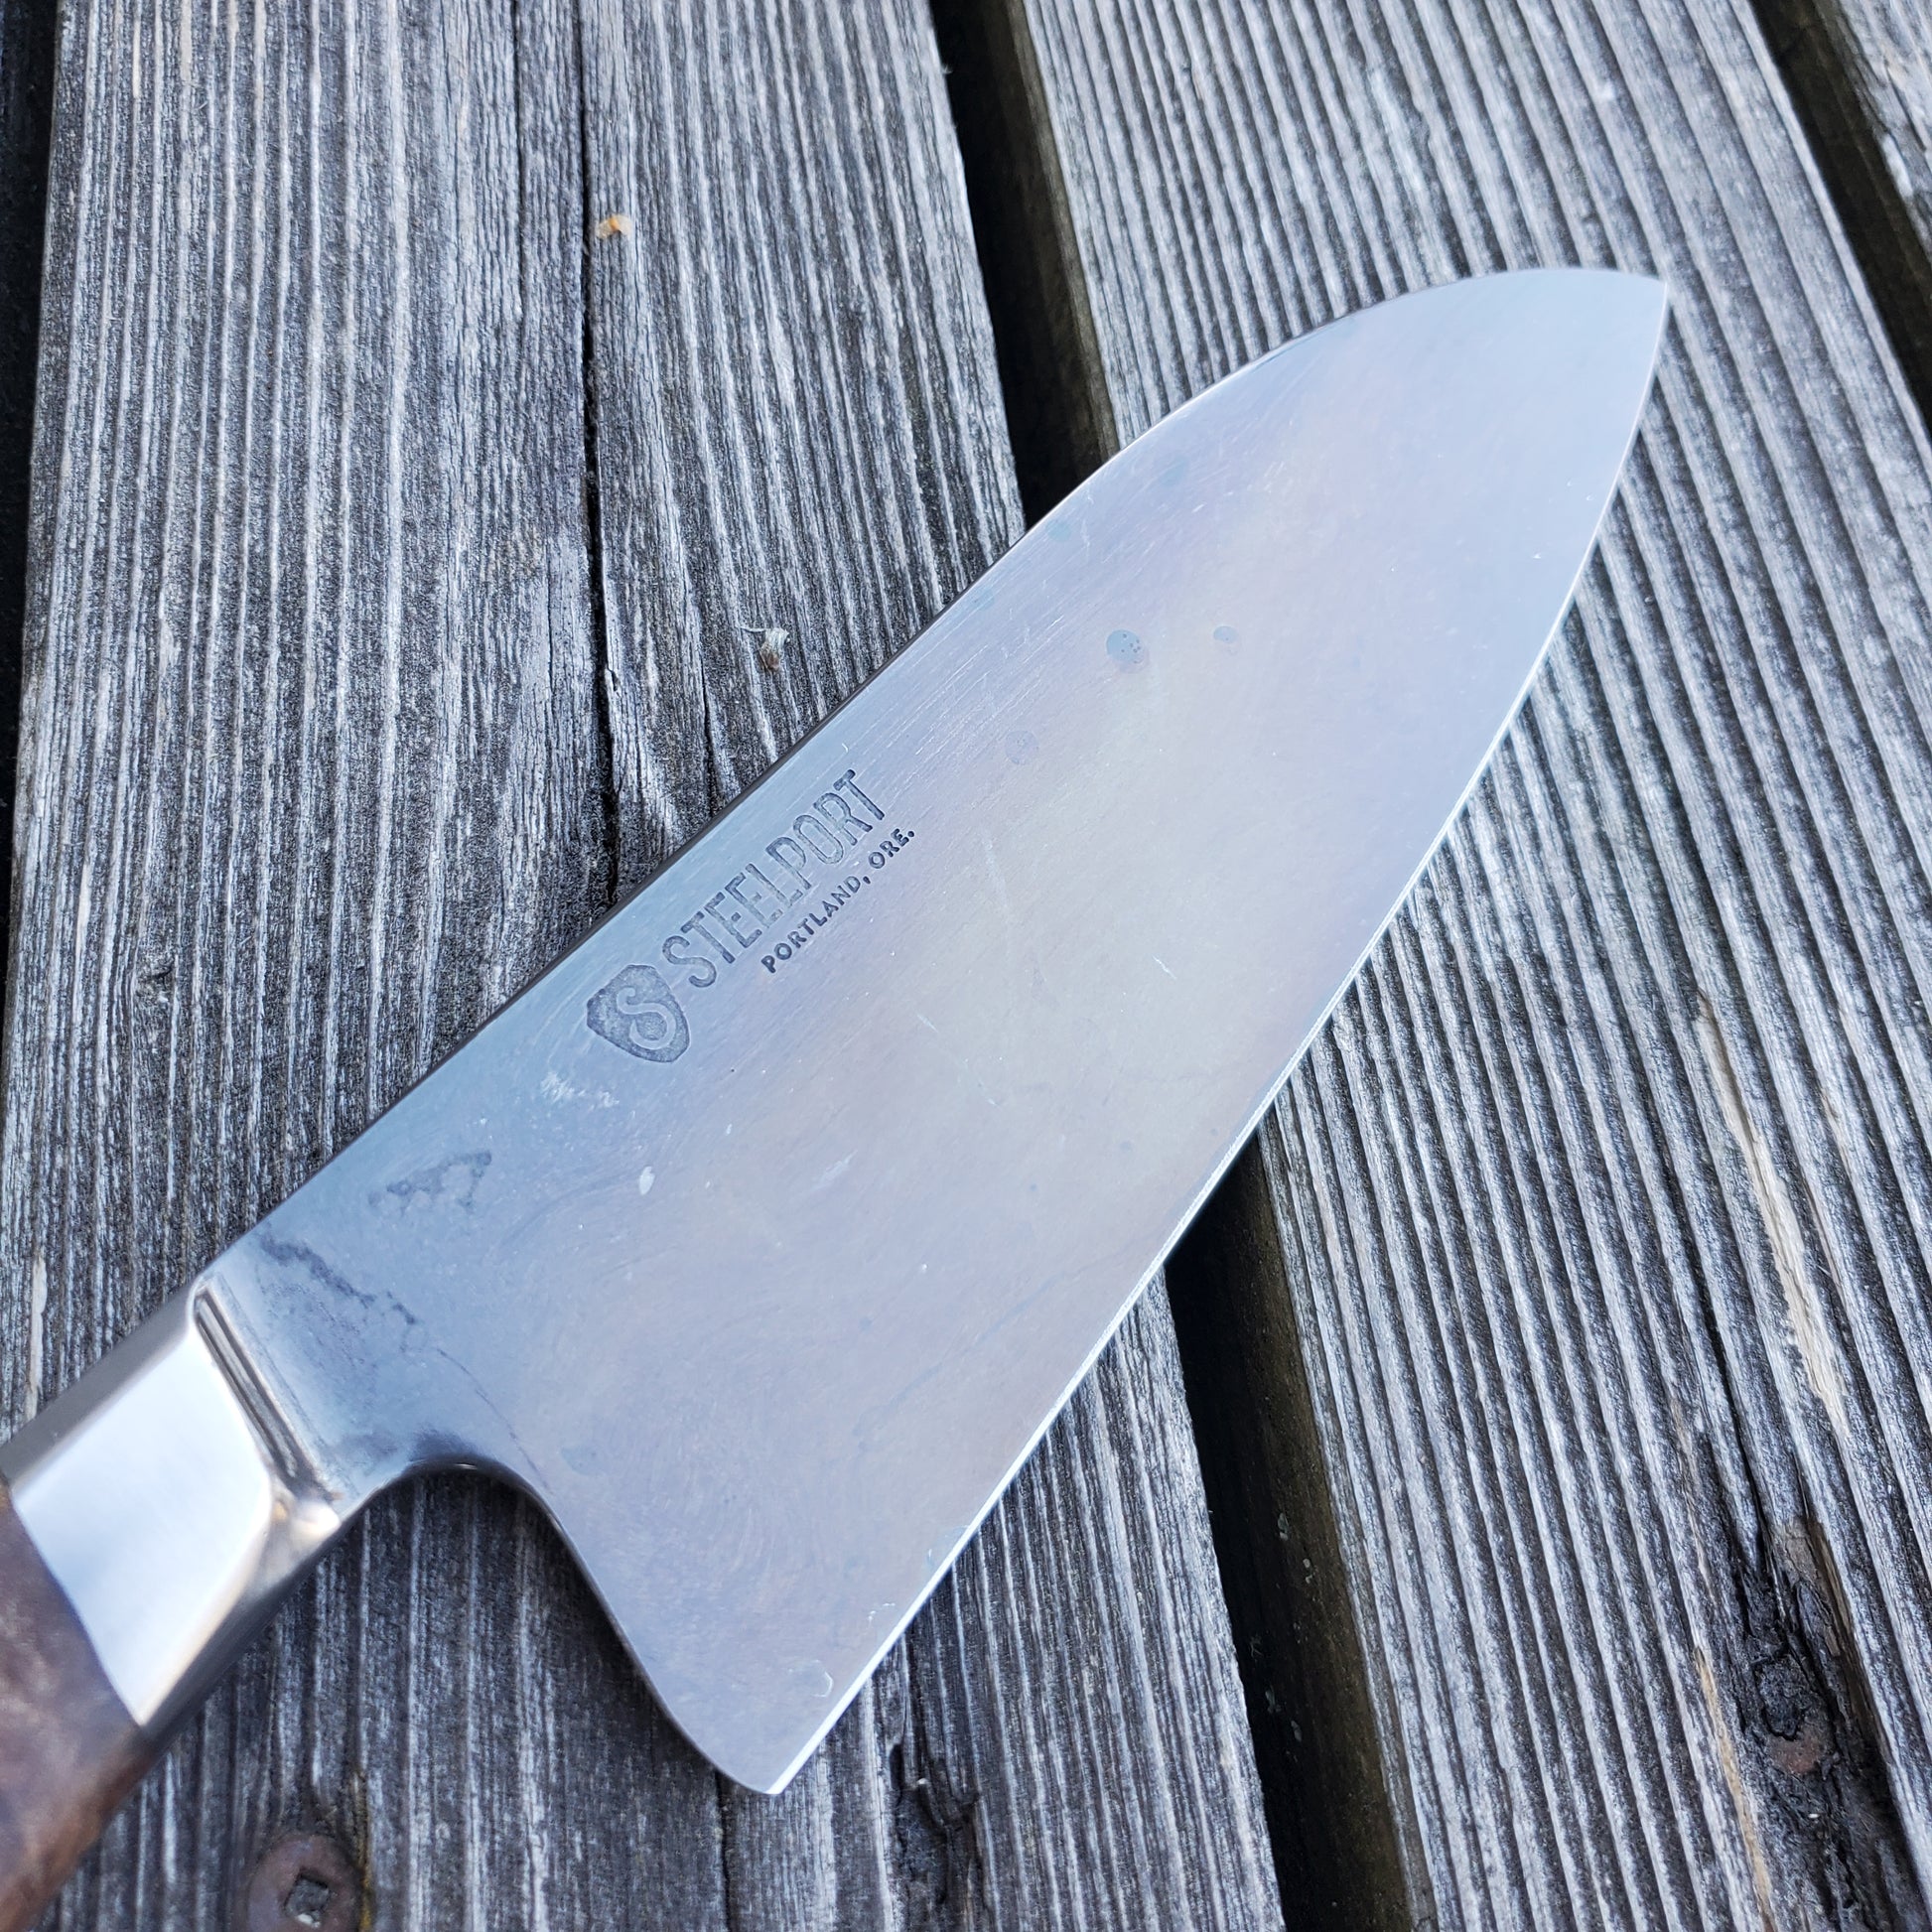 American-Forged Carbon Steel Knife - STEELPORT Knife Co.